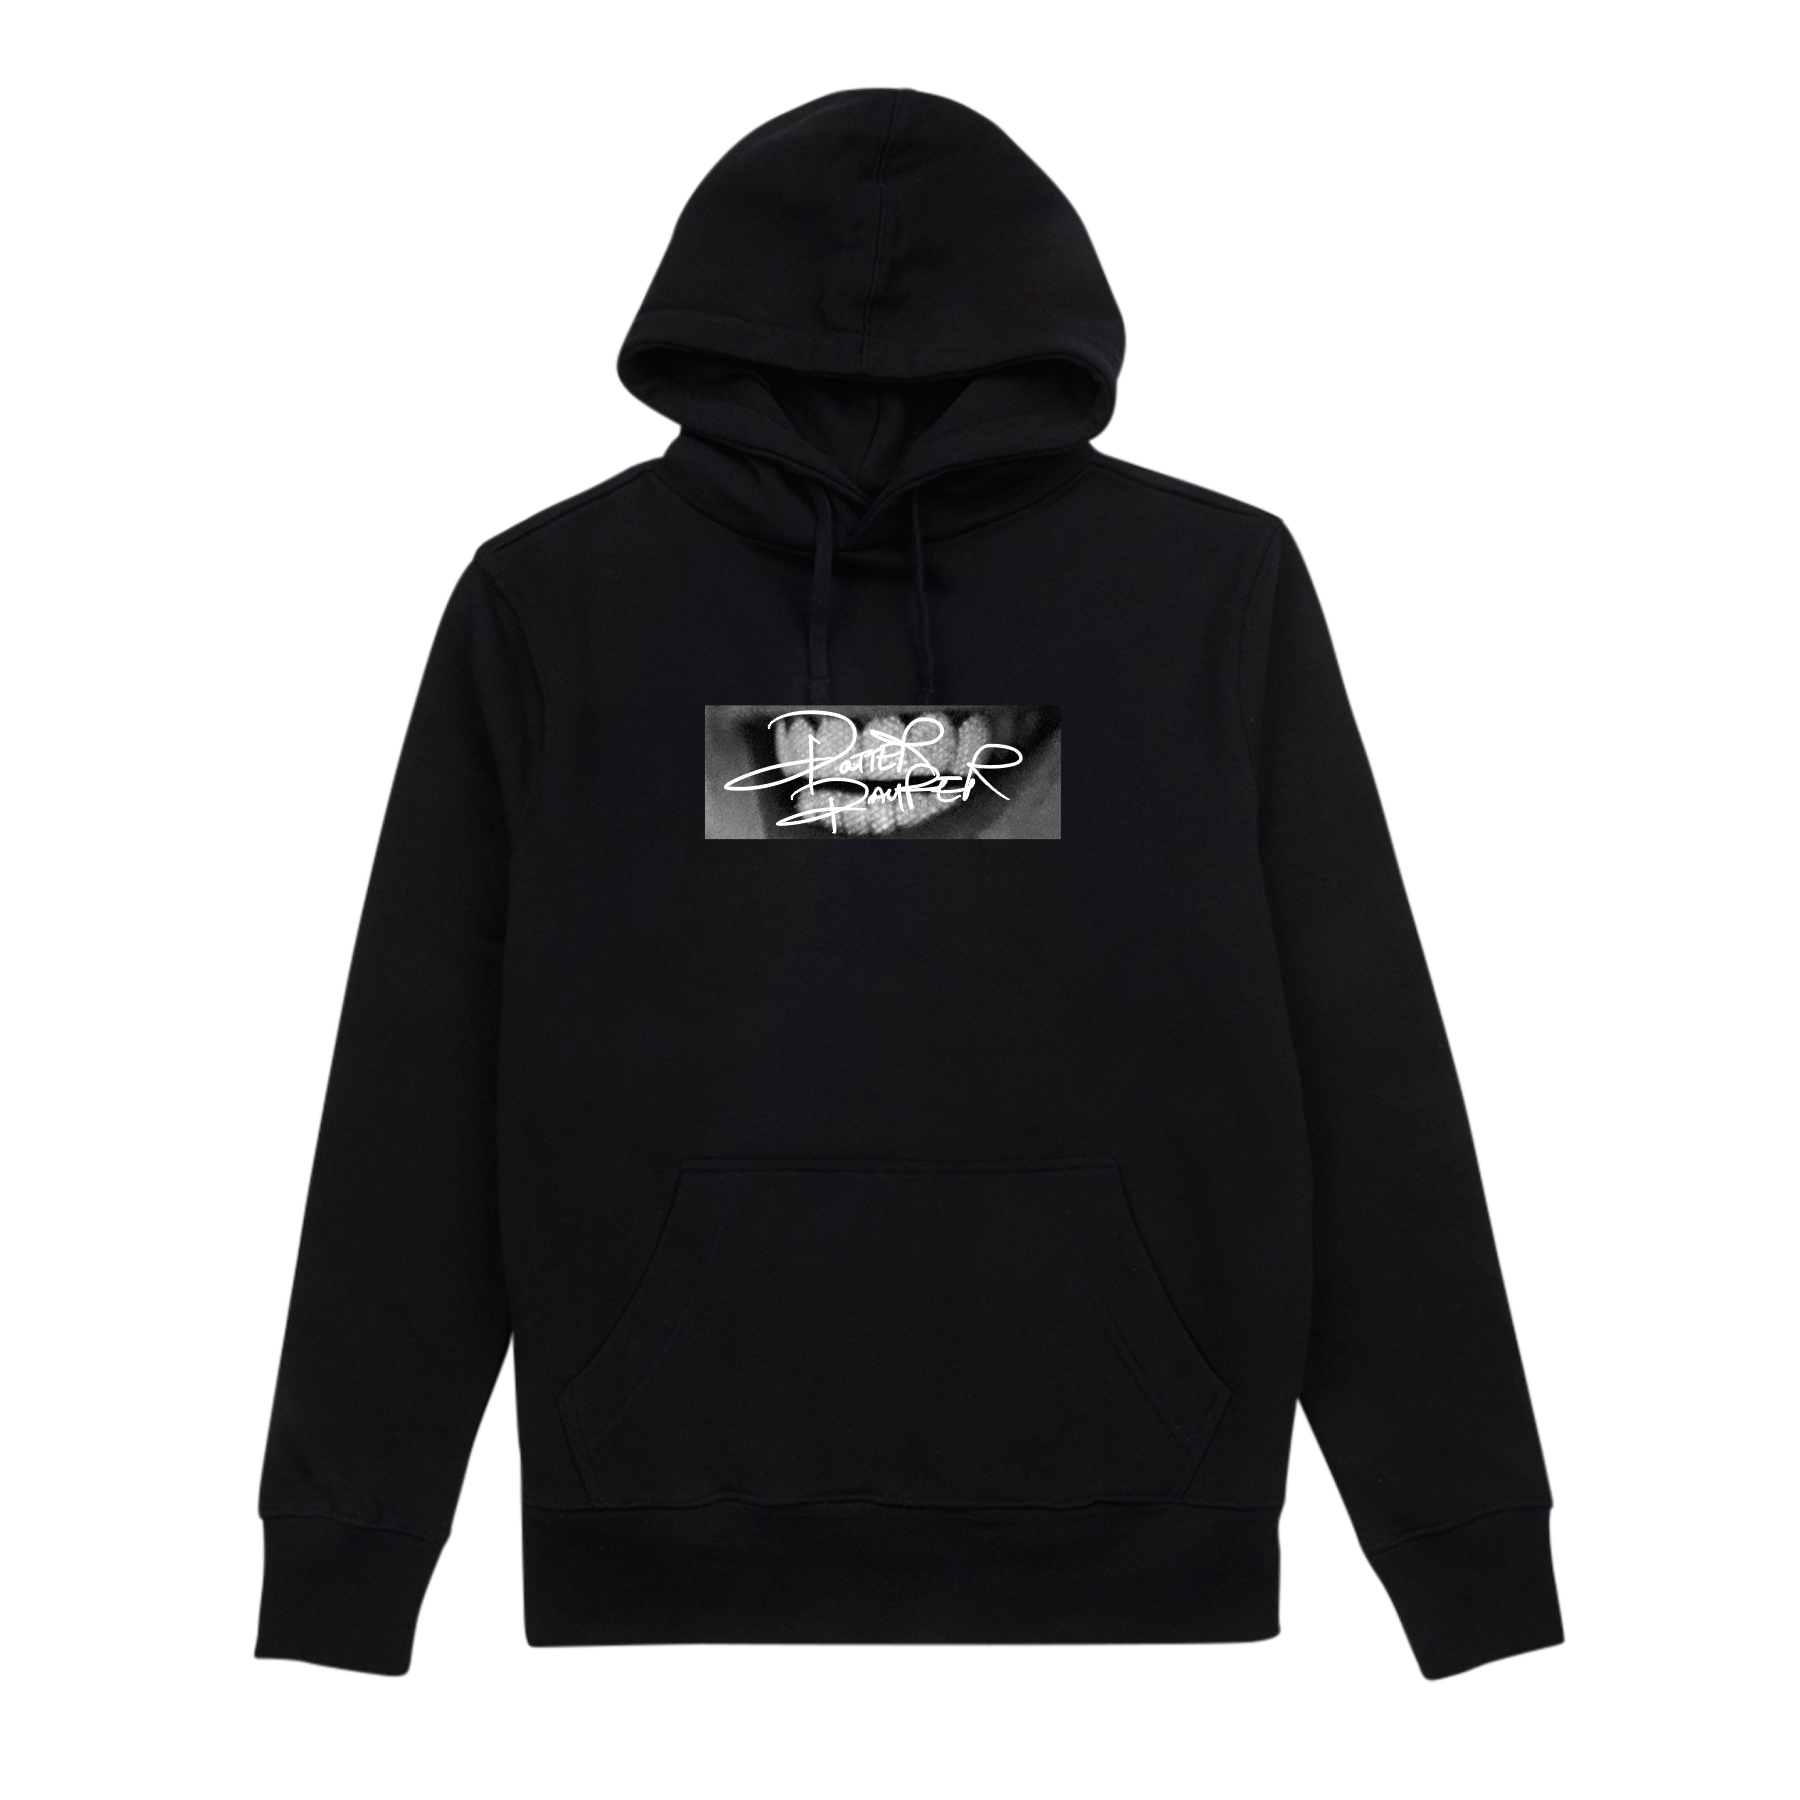 Potter Payper - Thanks For Waiting Hoodie